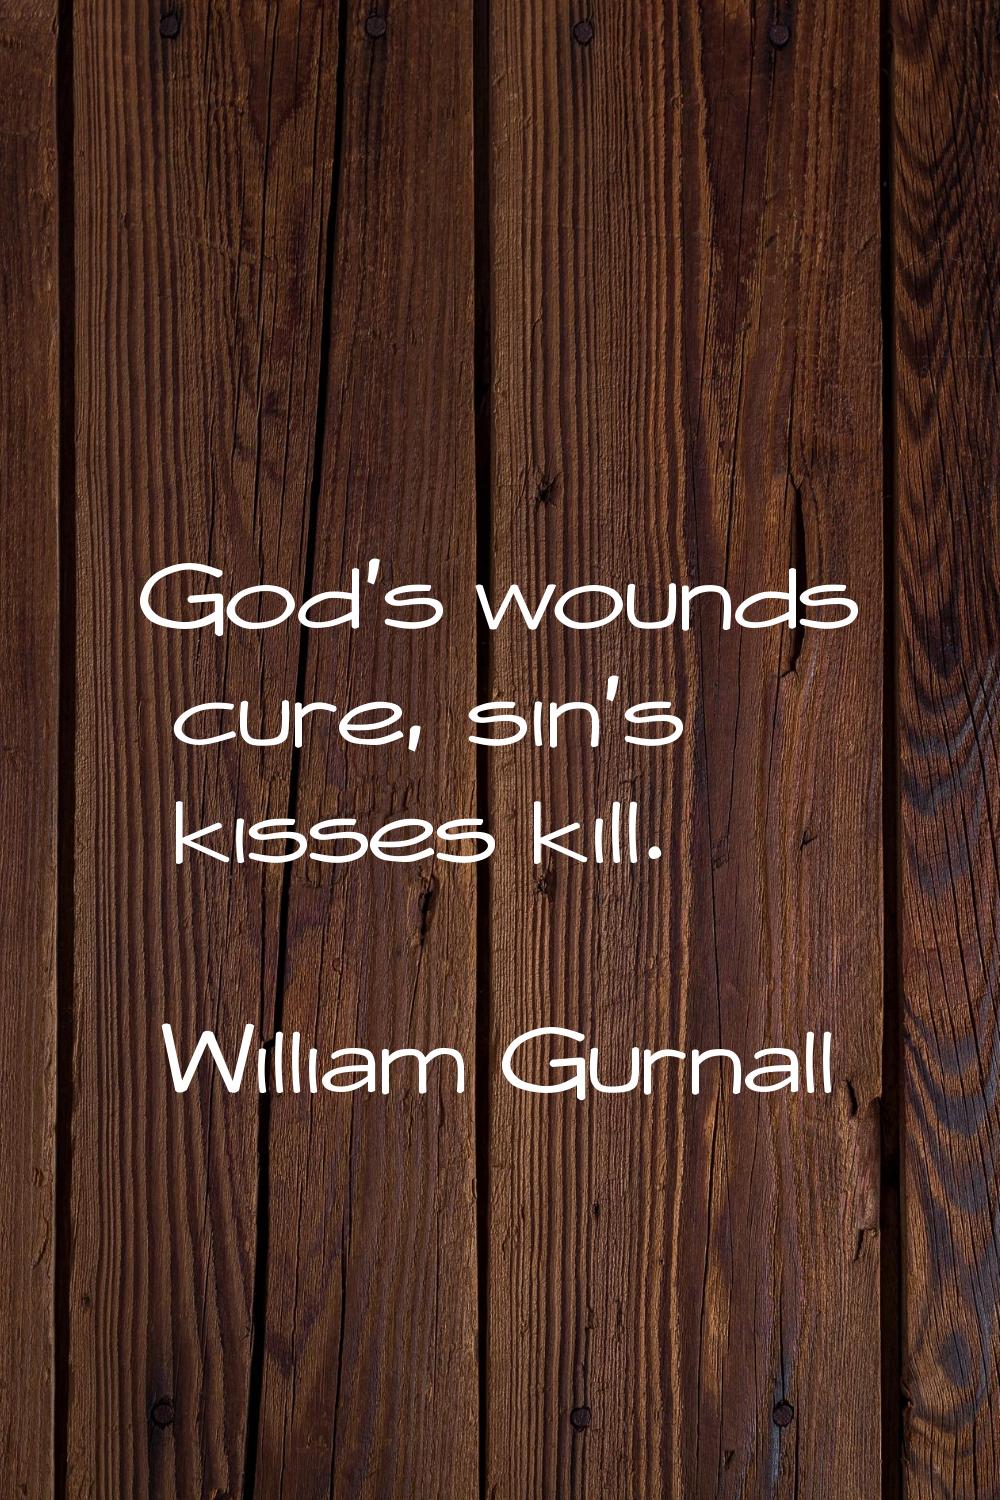 God's wounds cure, sin's kisses kill.